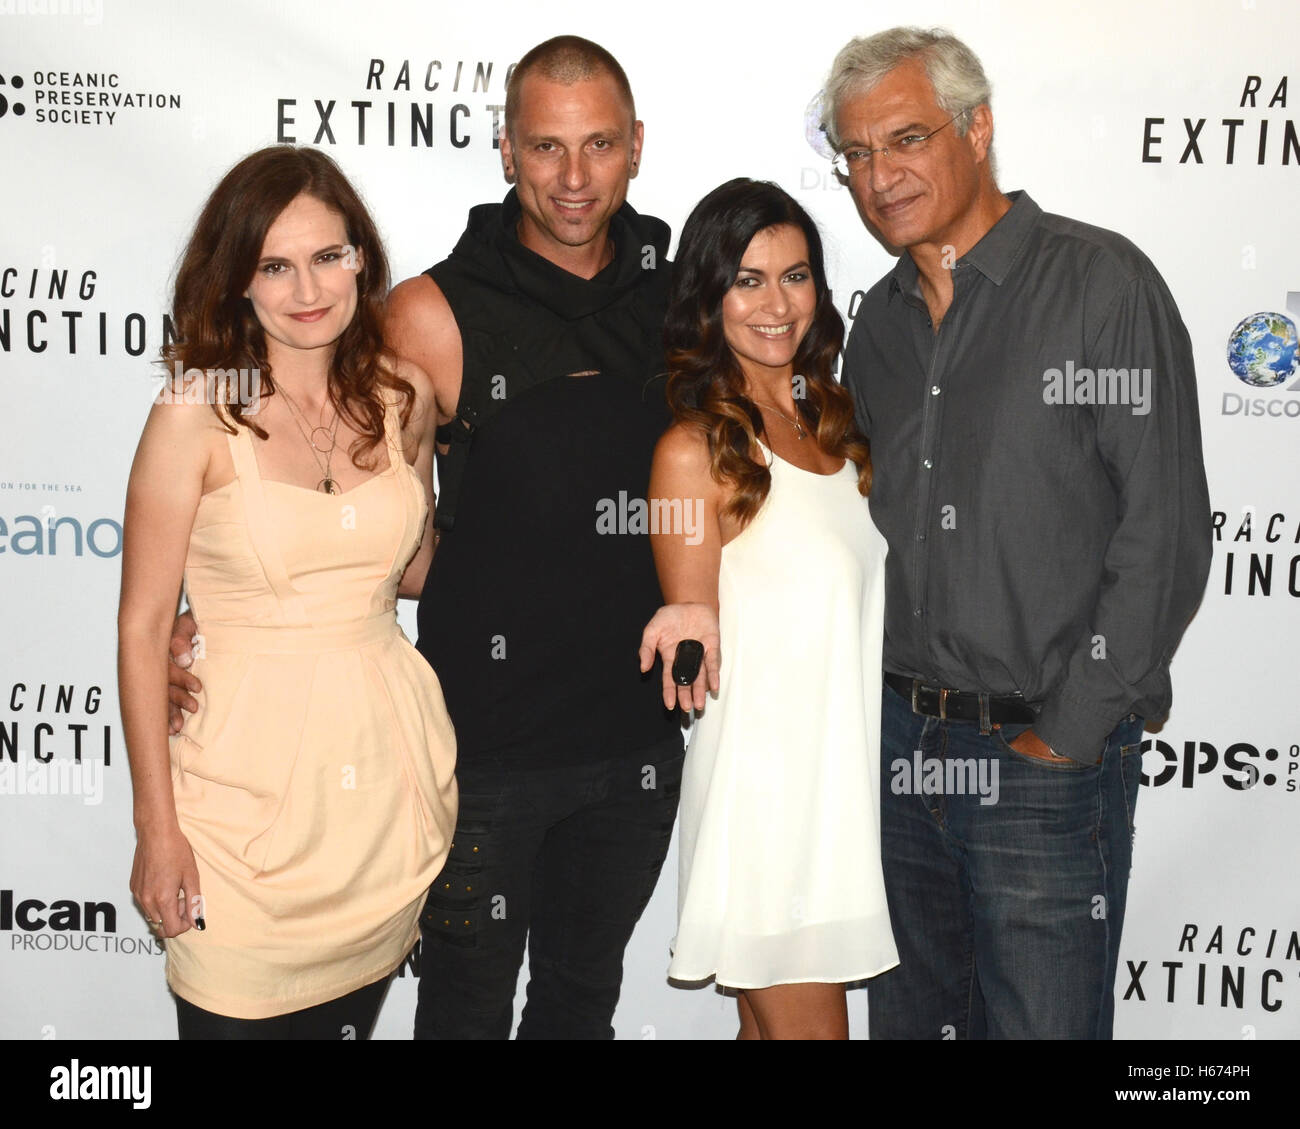 Gina Papabeis, Tom Sepe, Leilani Munter, and Louis Psihoyos arrives at the Los Angeles premiere of the Discovery Channel's 'Racing Extinction' in West Hollywood Stock Photo